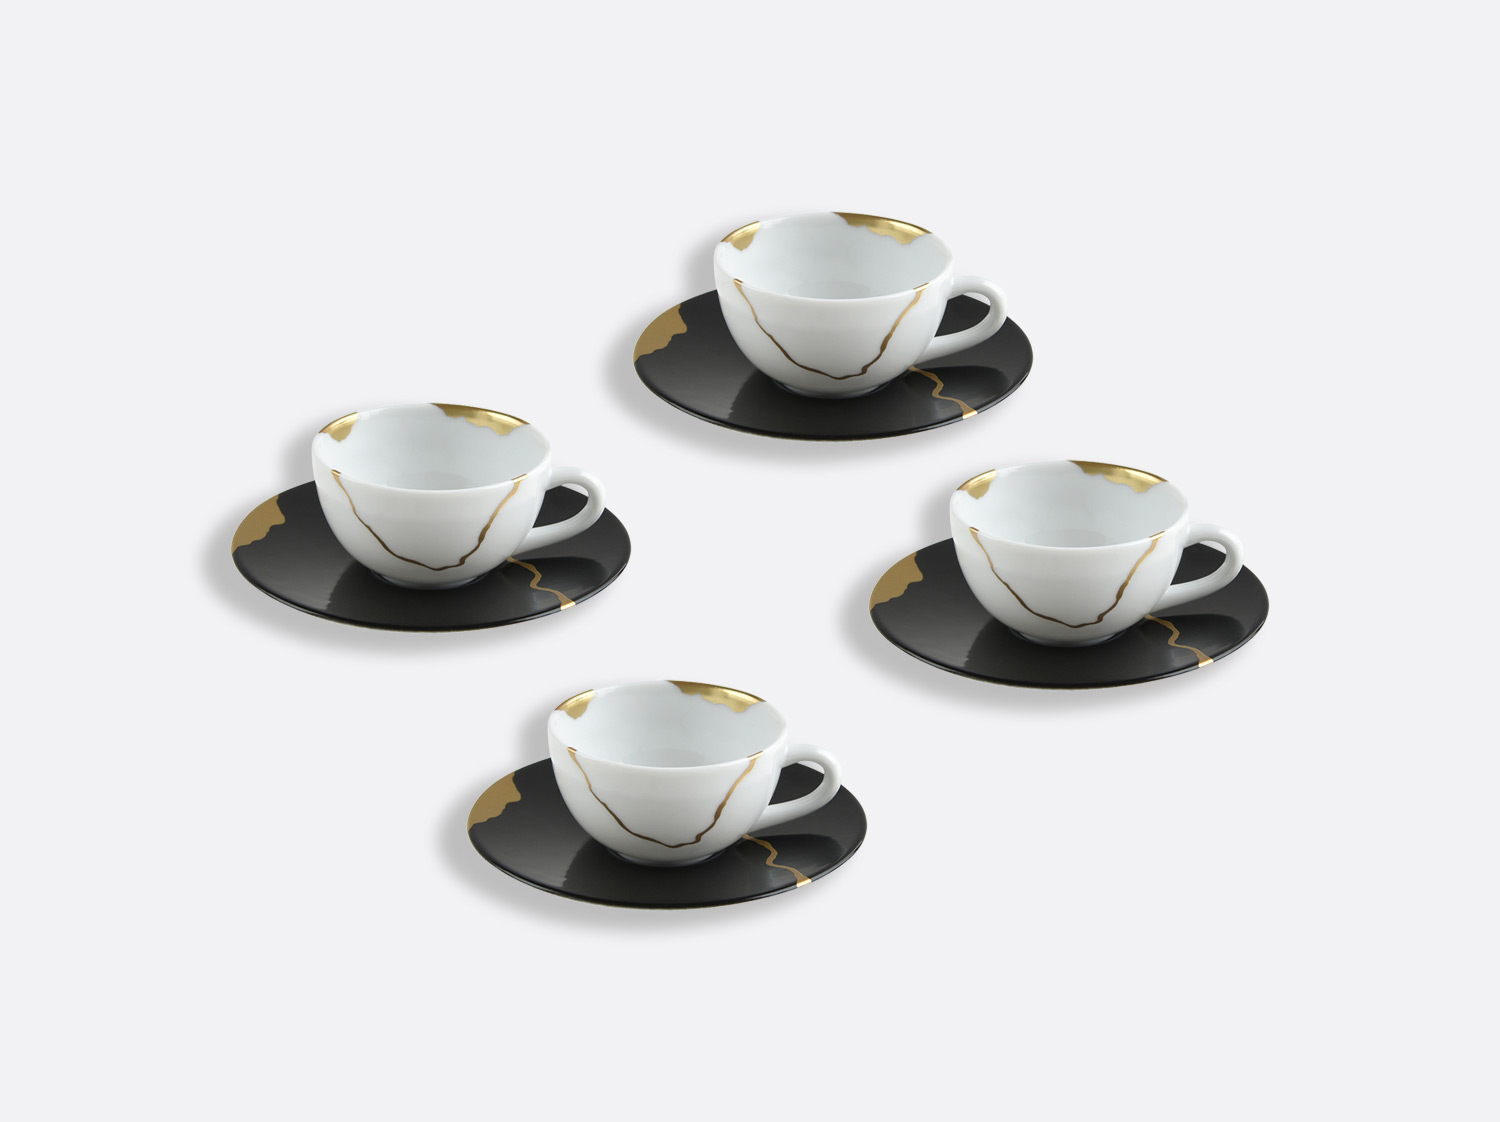 China Set of espresso cups and saucers 3.5 oz - Set of 4  of the collection KINTSUGI Charbon | Bernardaud